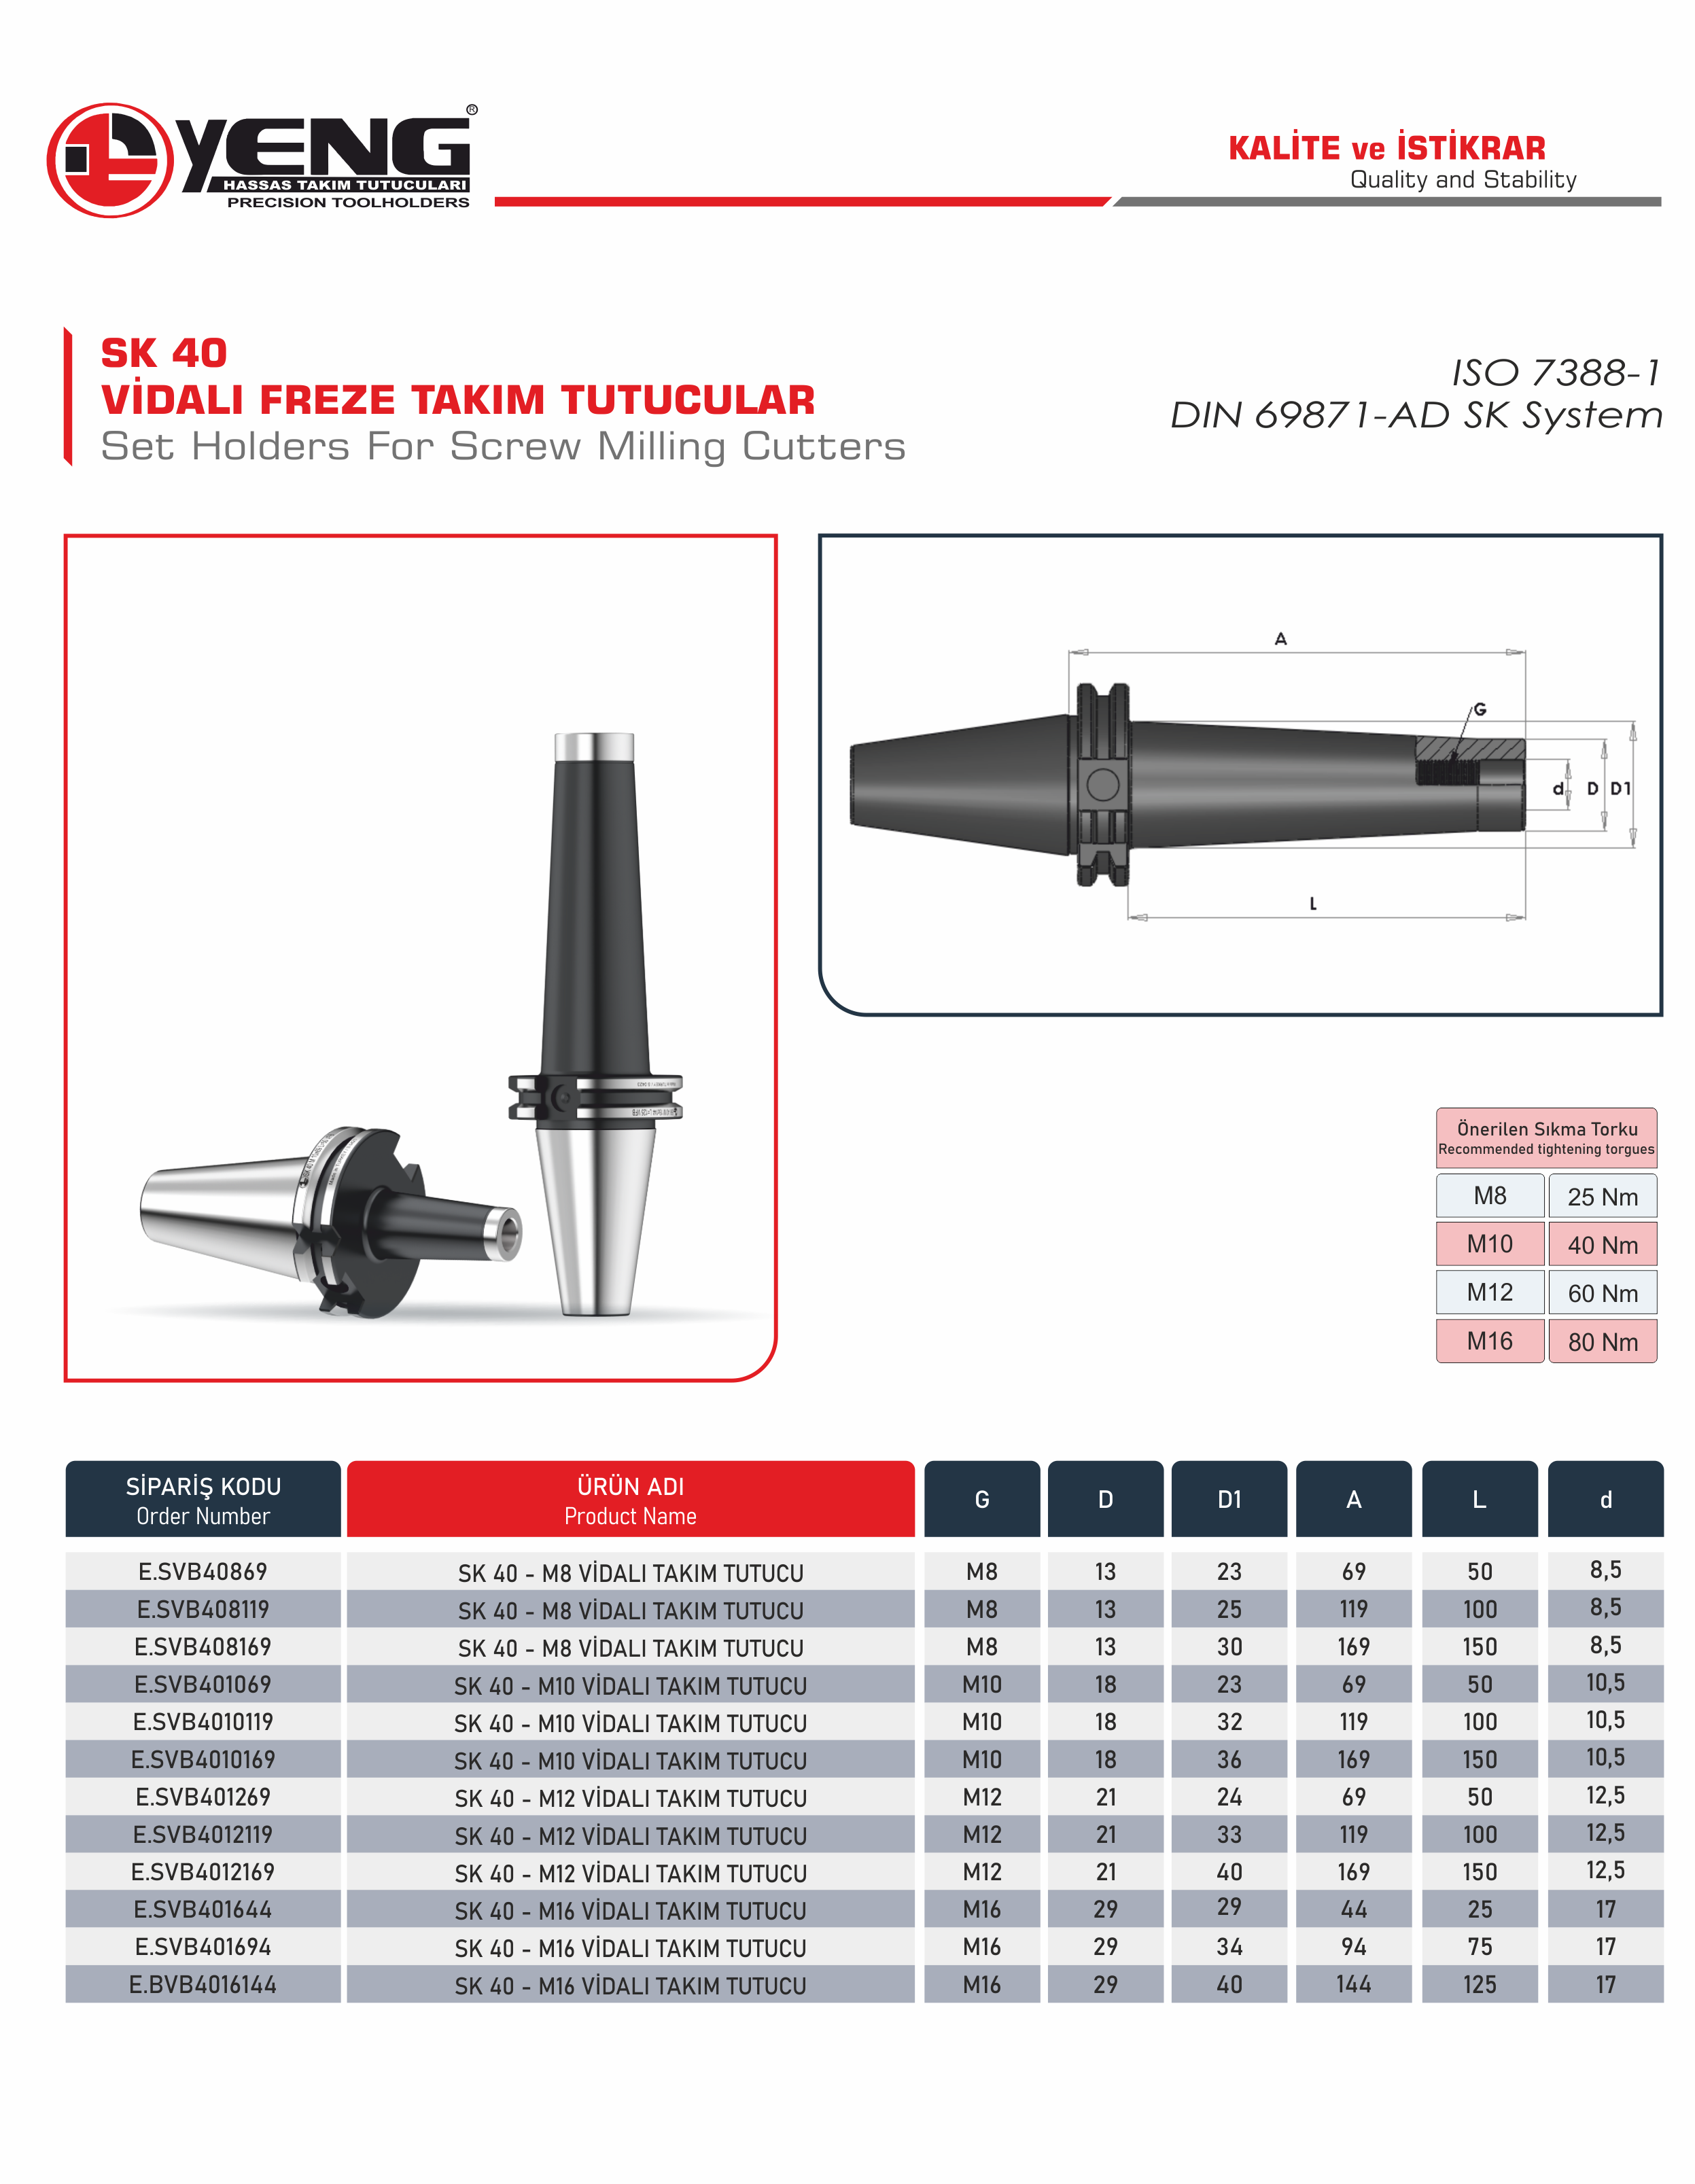 SK 40 Set Holders For Screw Milling Cutters